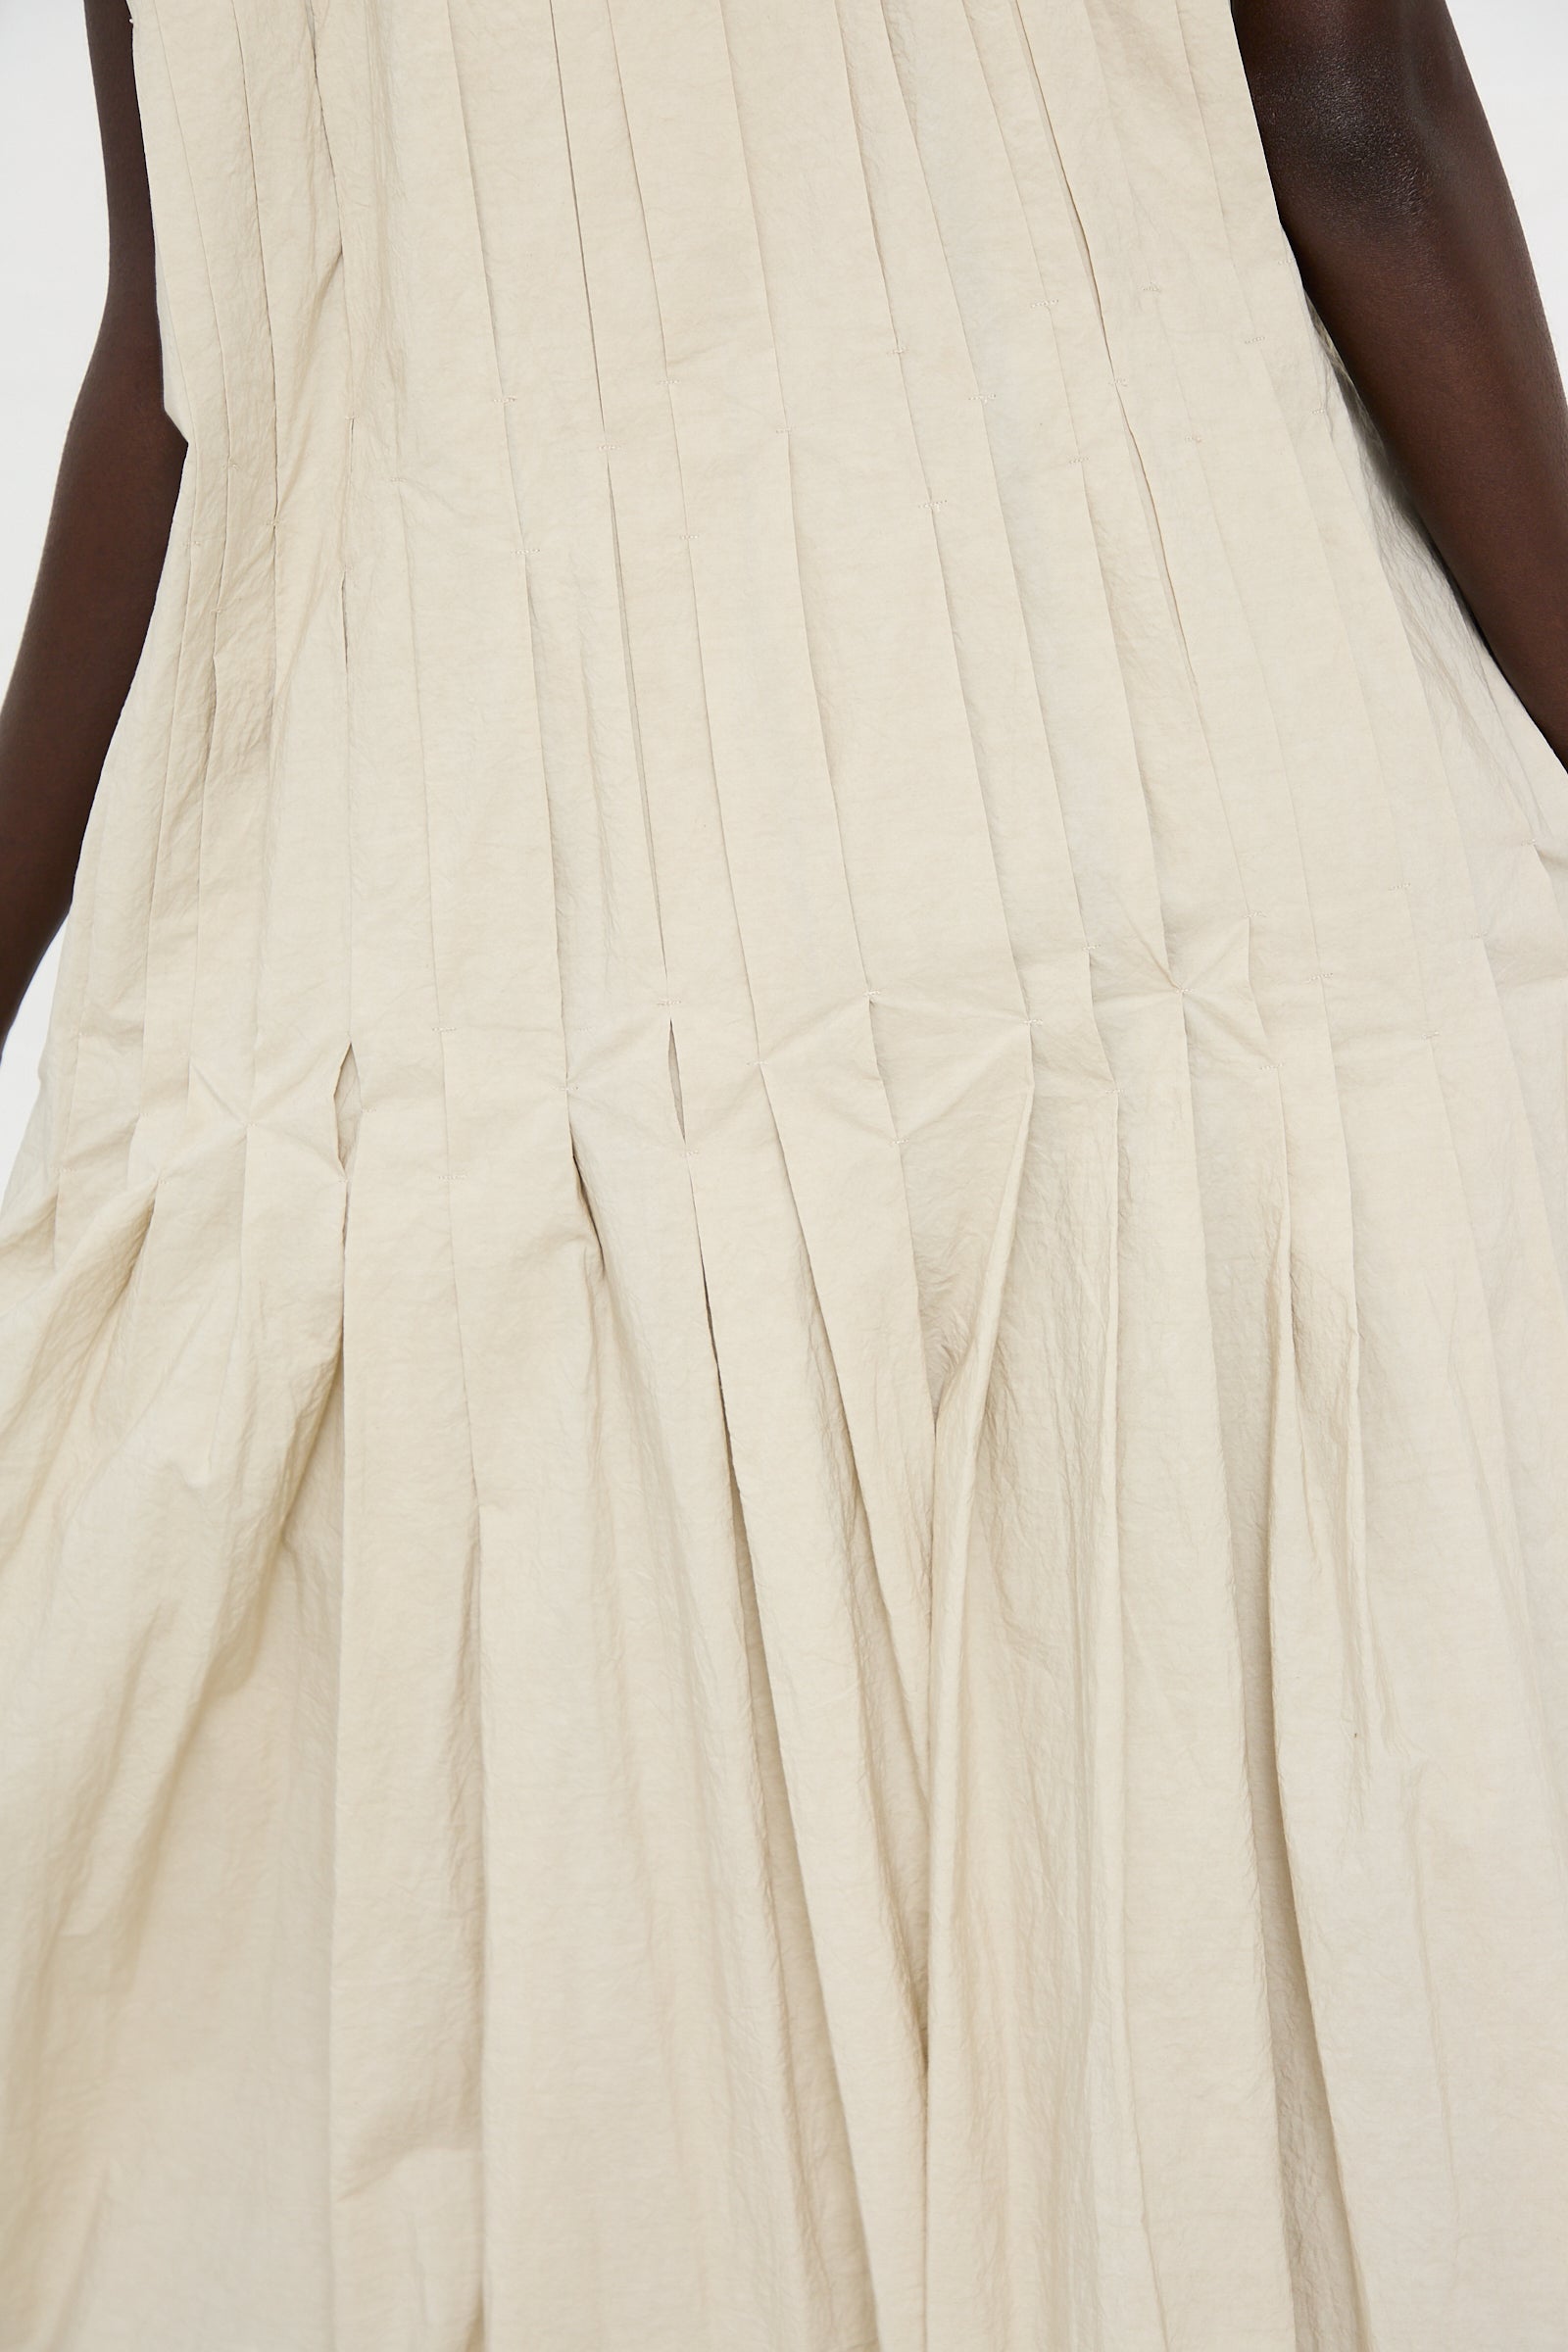 Close-up of a person wearing the Hand Pleat Dress in Greige by Lauren Manoogian, a beige, pleated, and textured sleeveless maxi dress made from hand-dyed cotton/linen blend fabric.